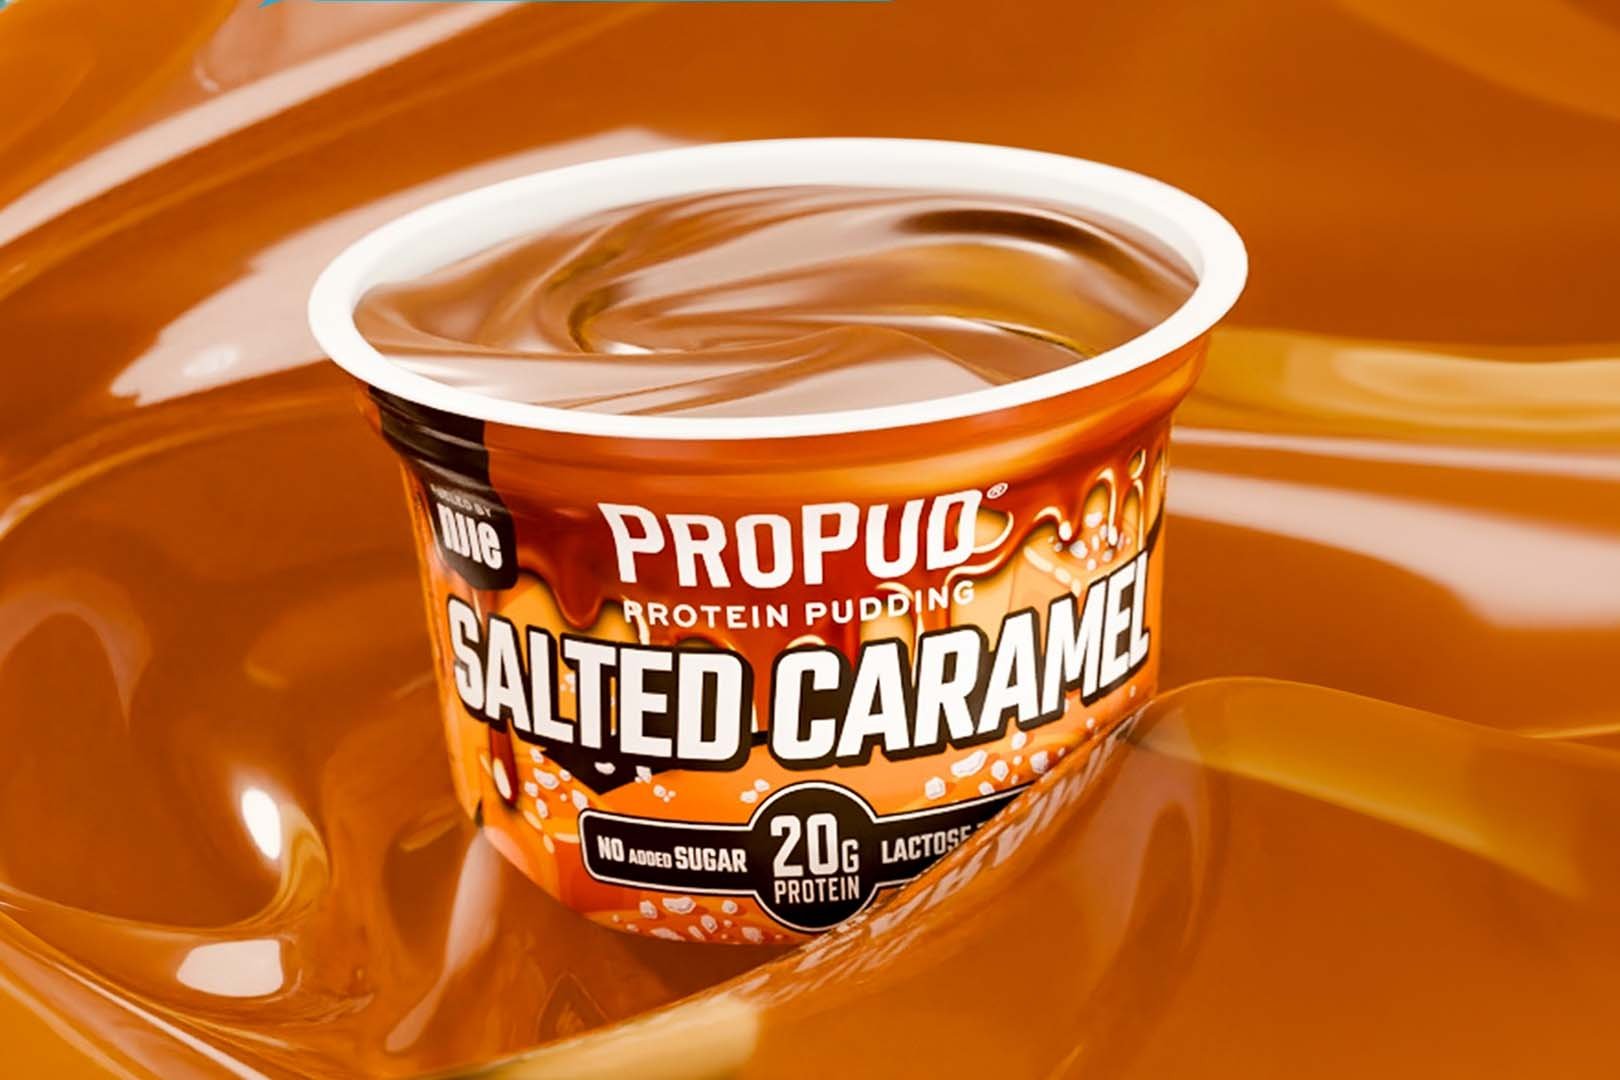 Salted Caramel Propud Protein Pudding